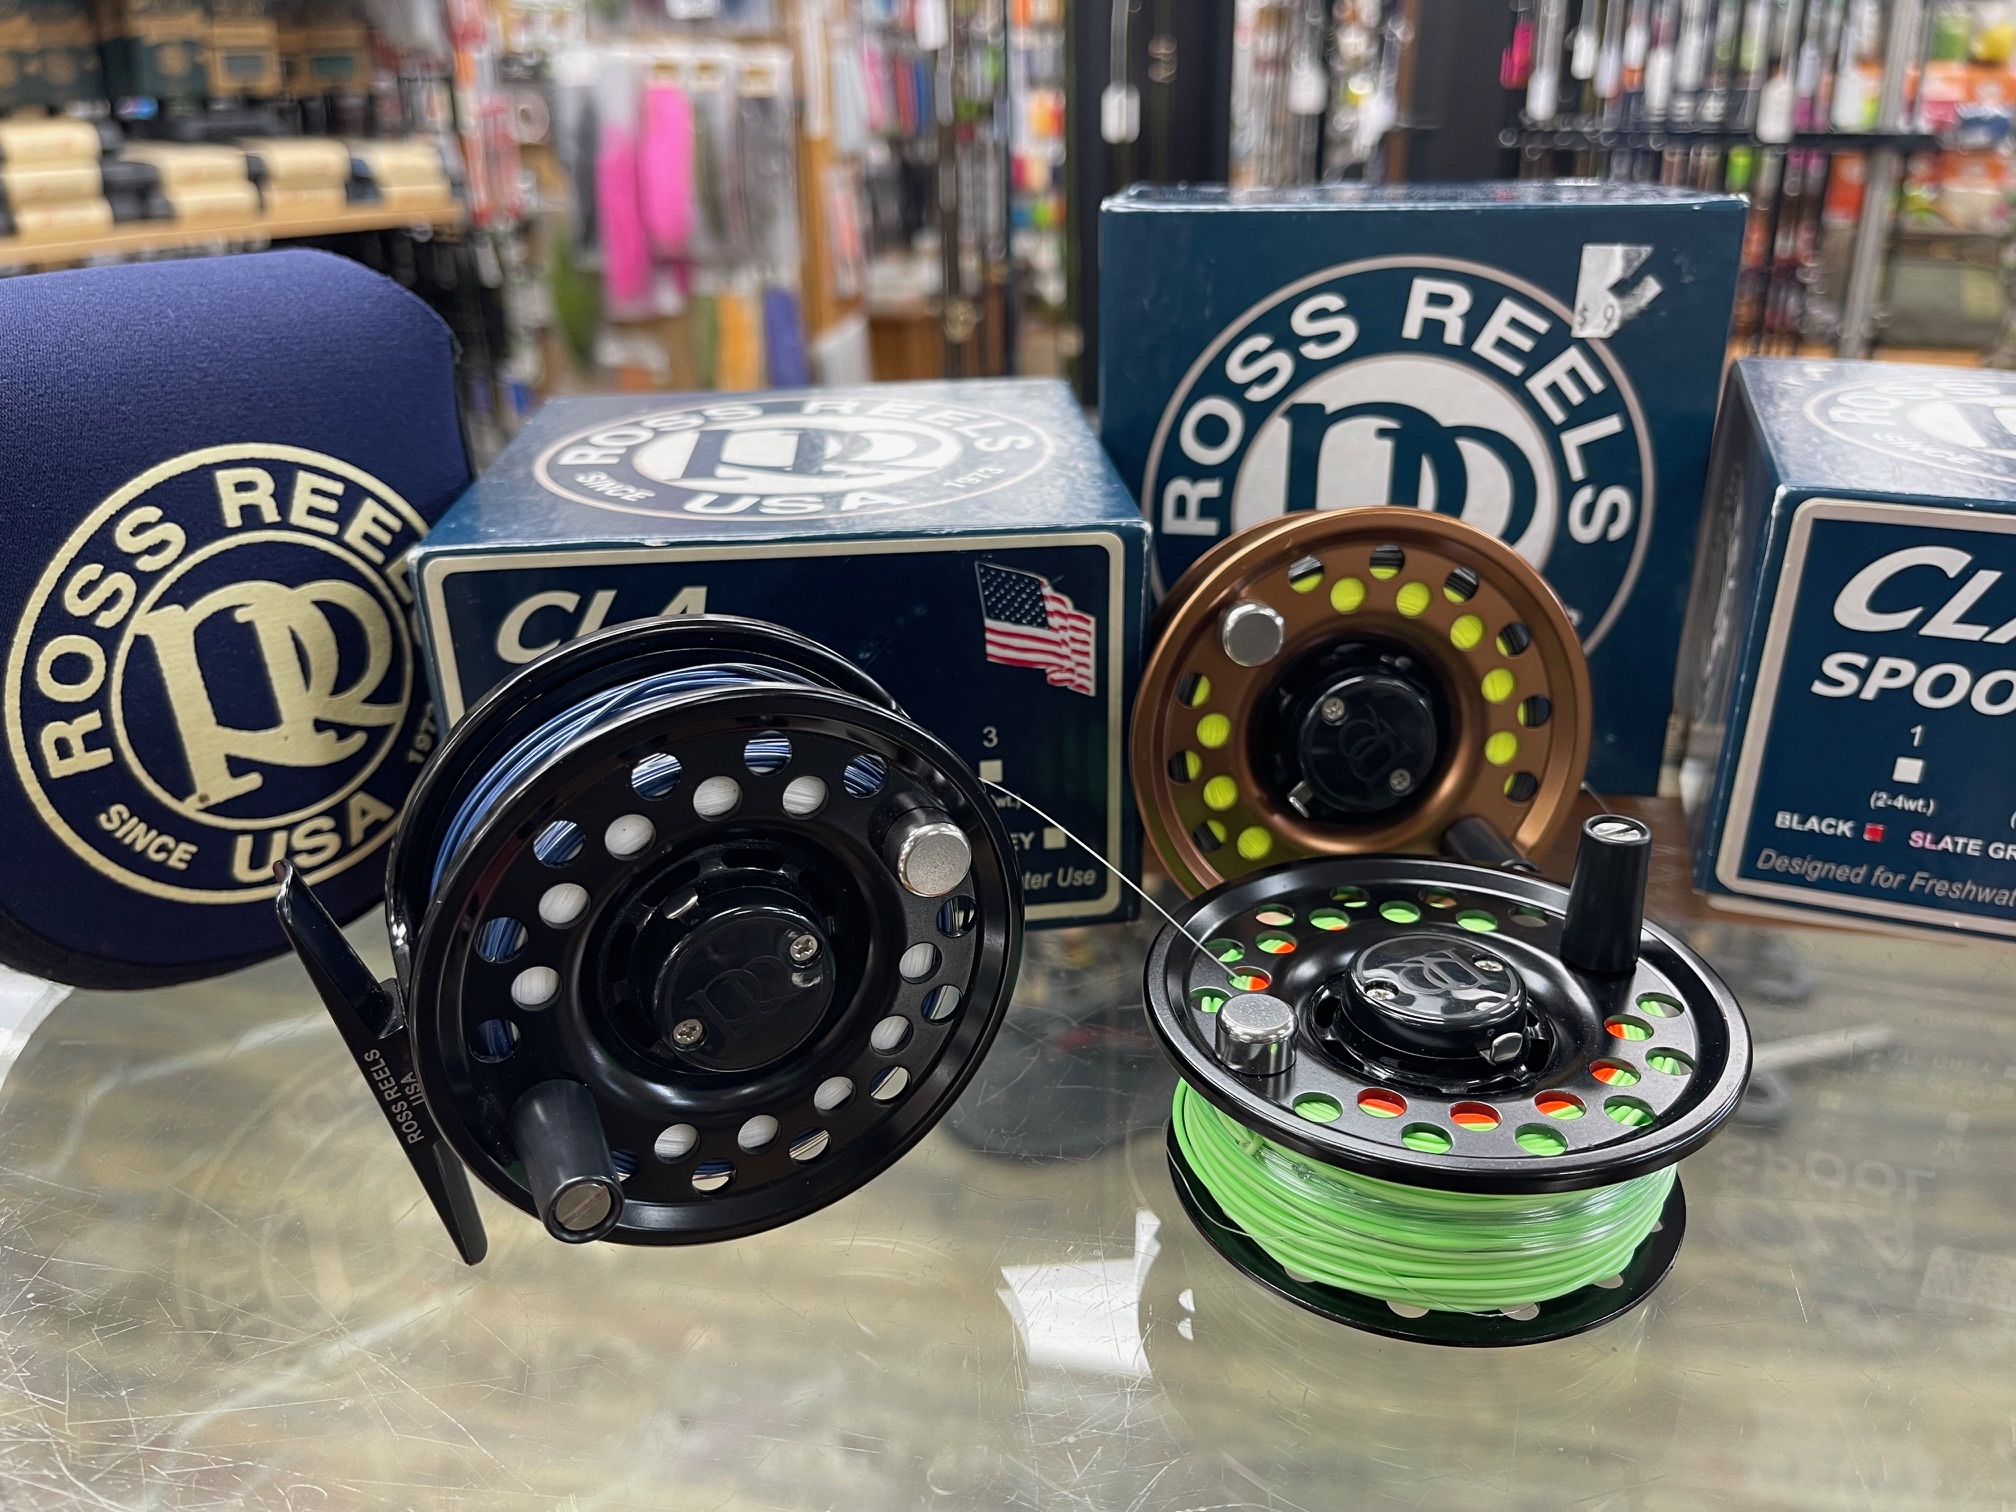 Ross CLA 2 Fly Reel w/ 2 Spare Spools - Lightly Used - Comes with 3 almost new Fly Lines